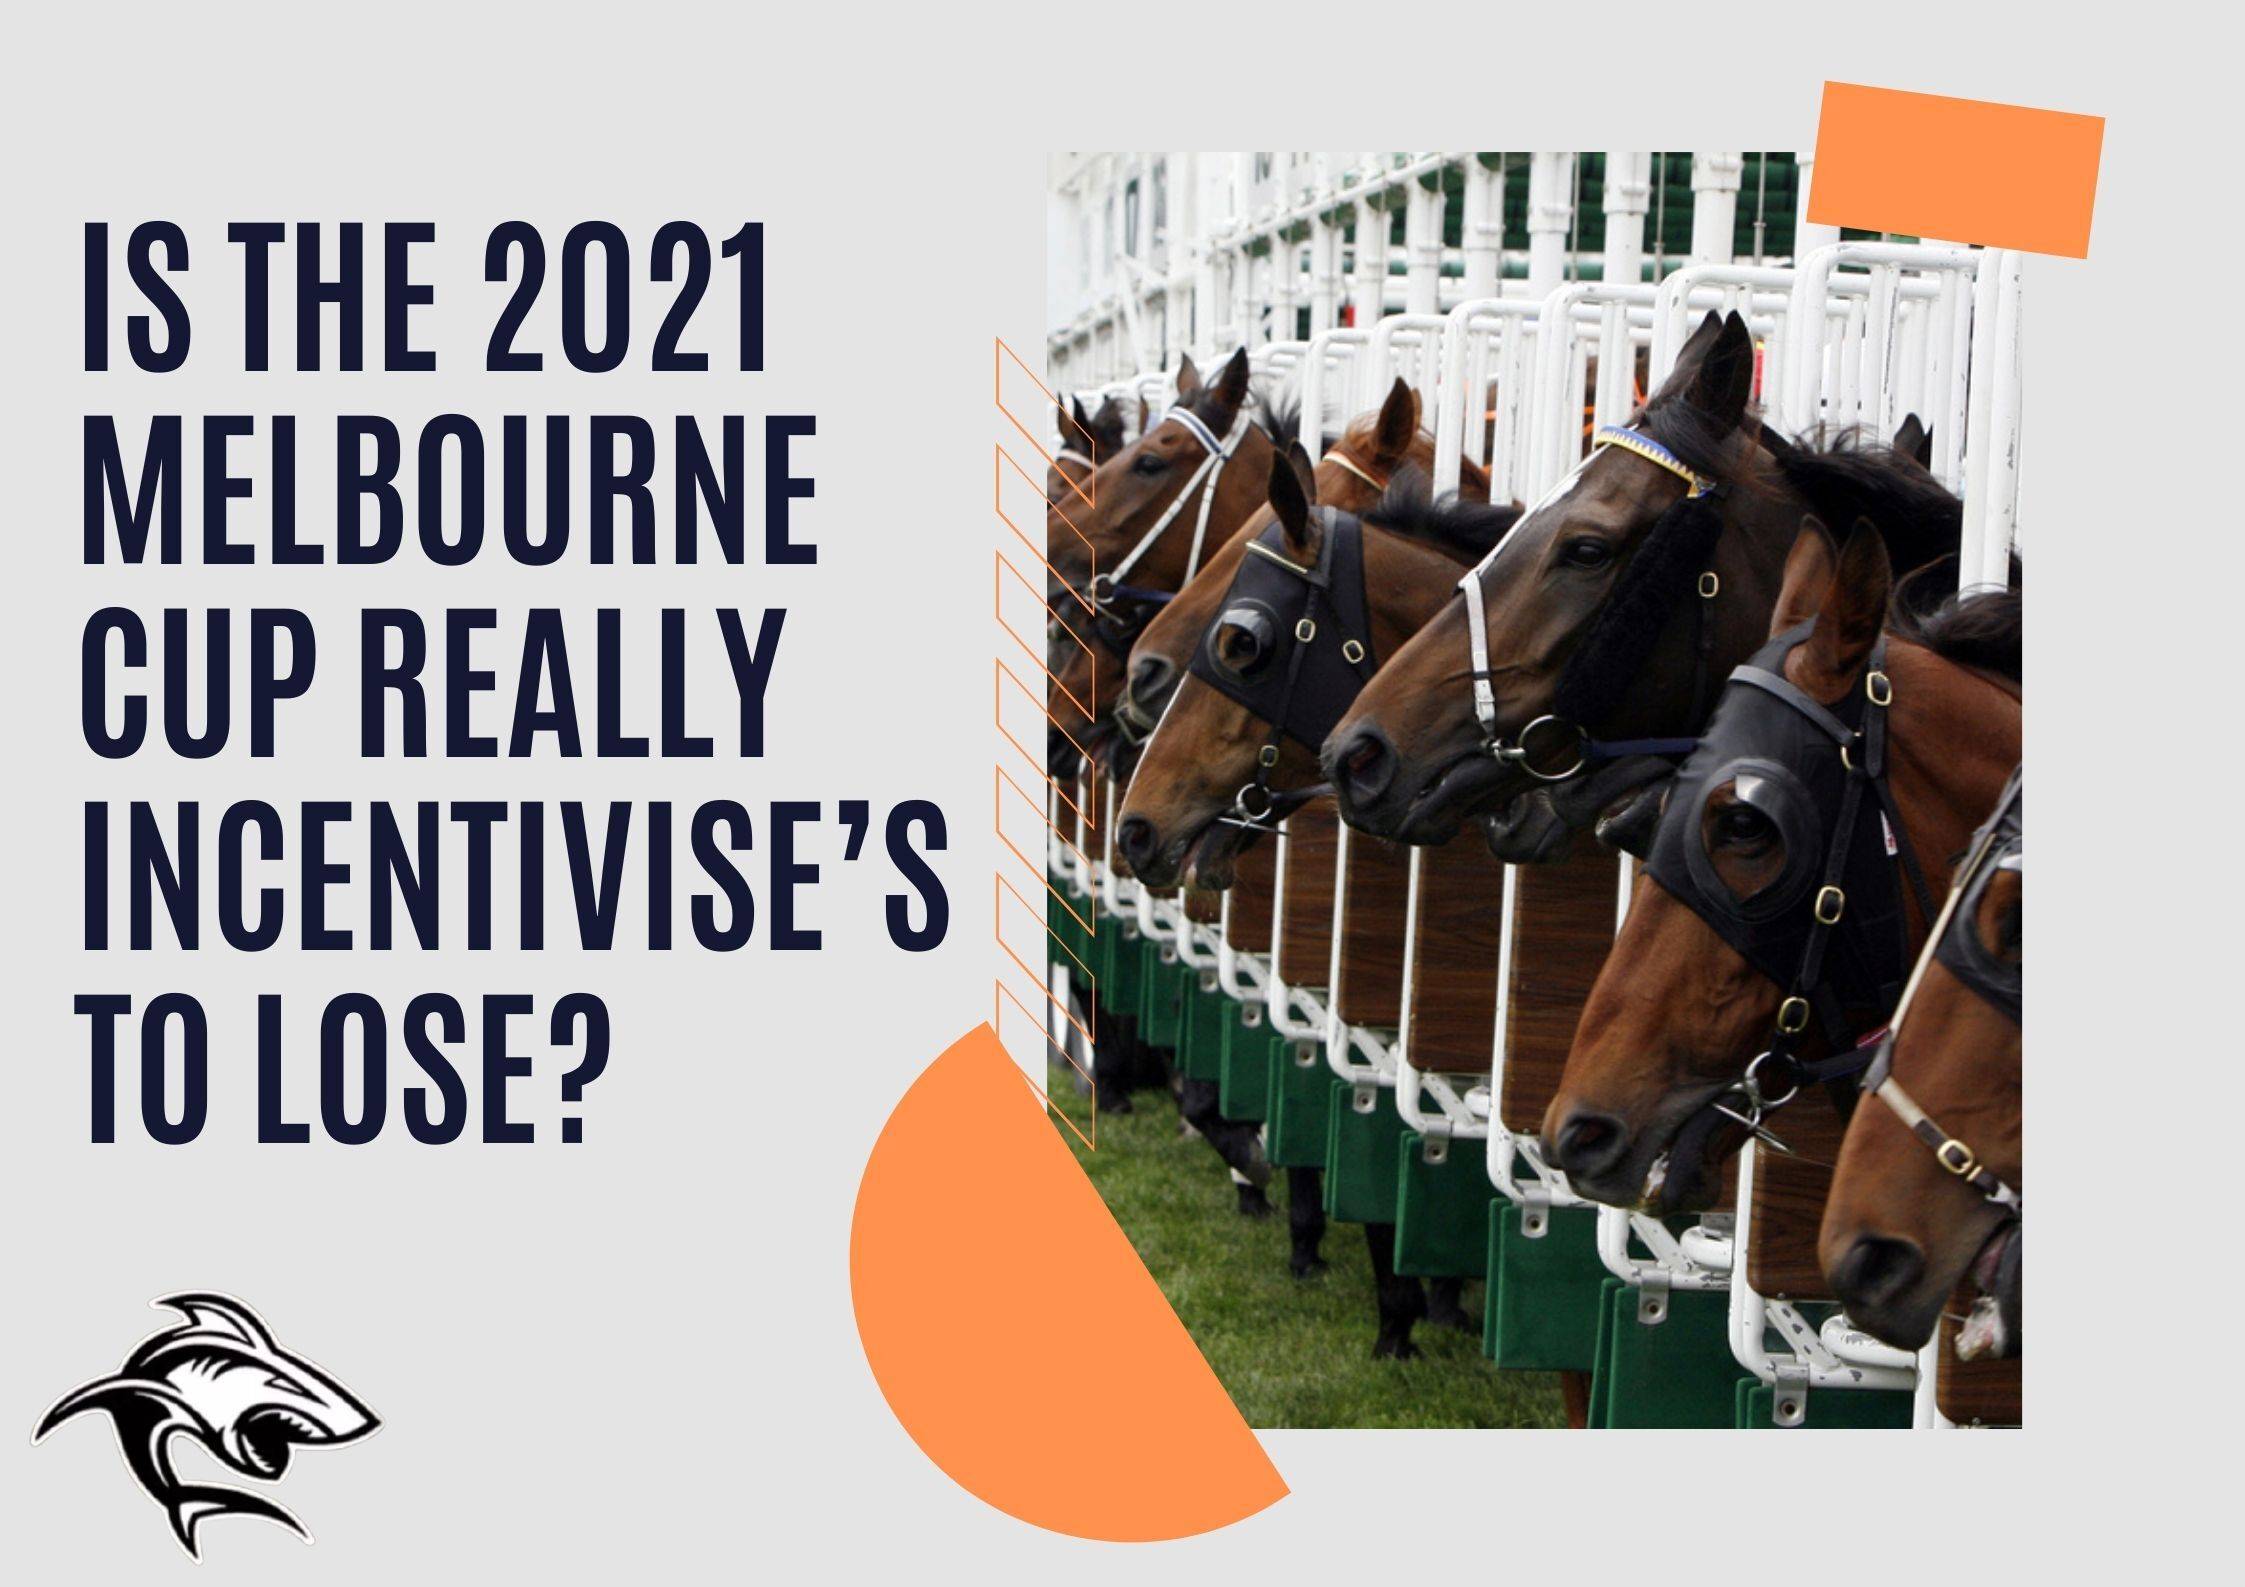 Is the 2021 Melbourne Cup really Incentivise’s to lose?